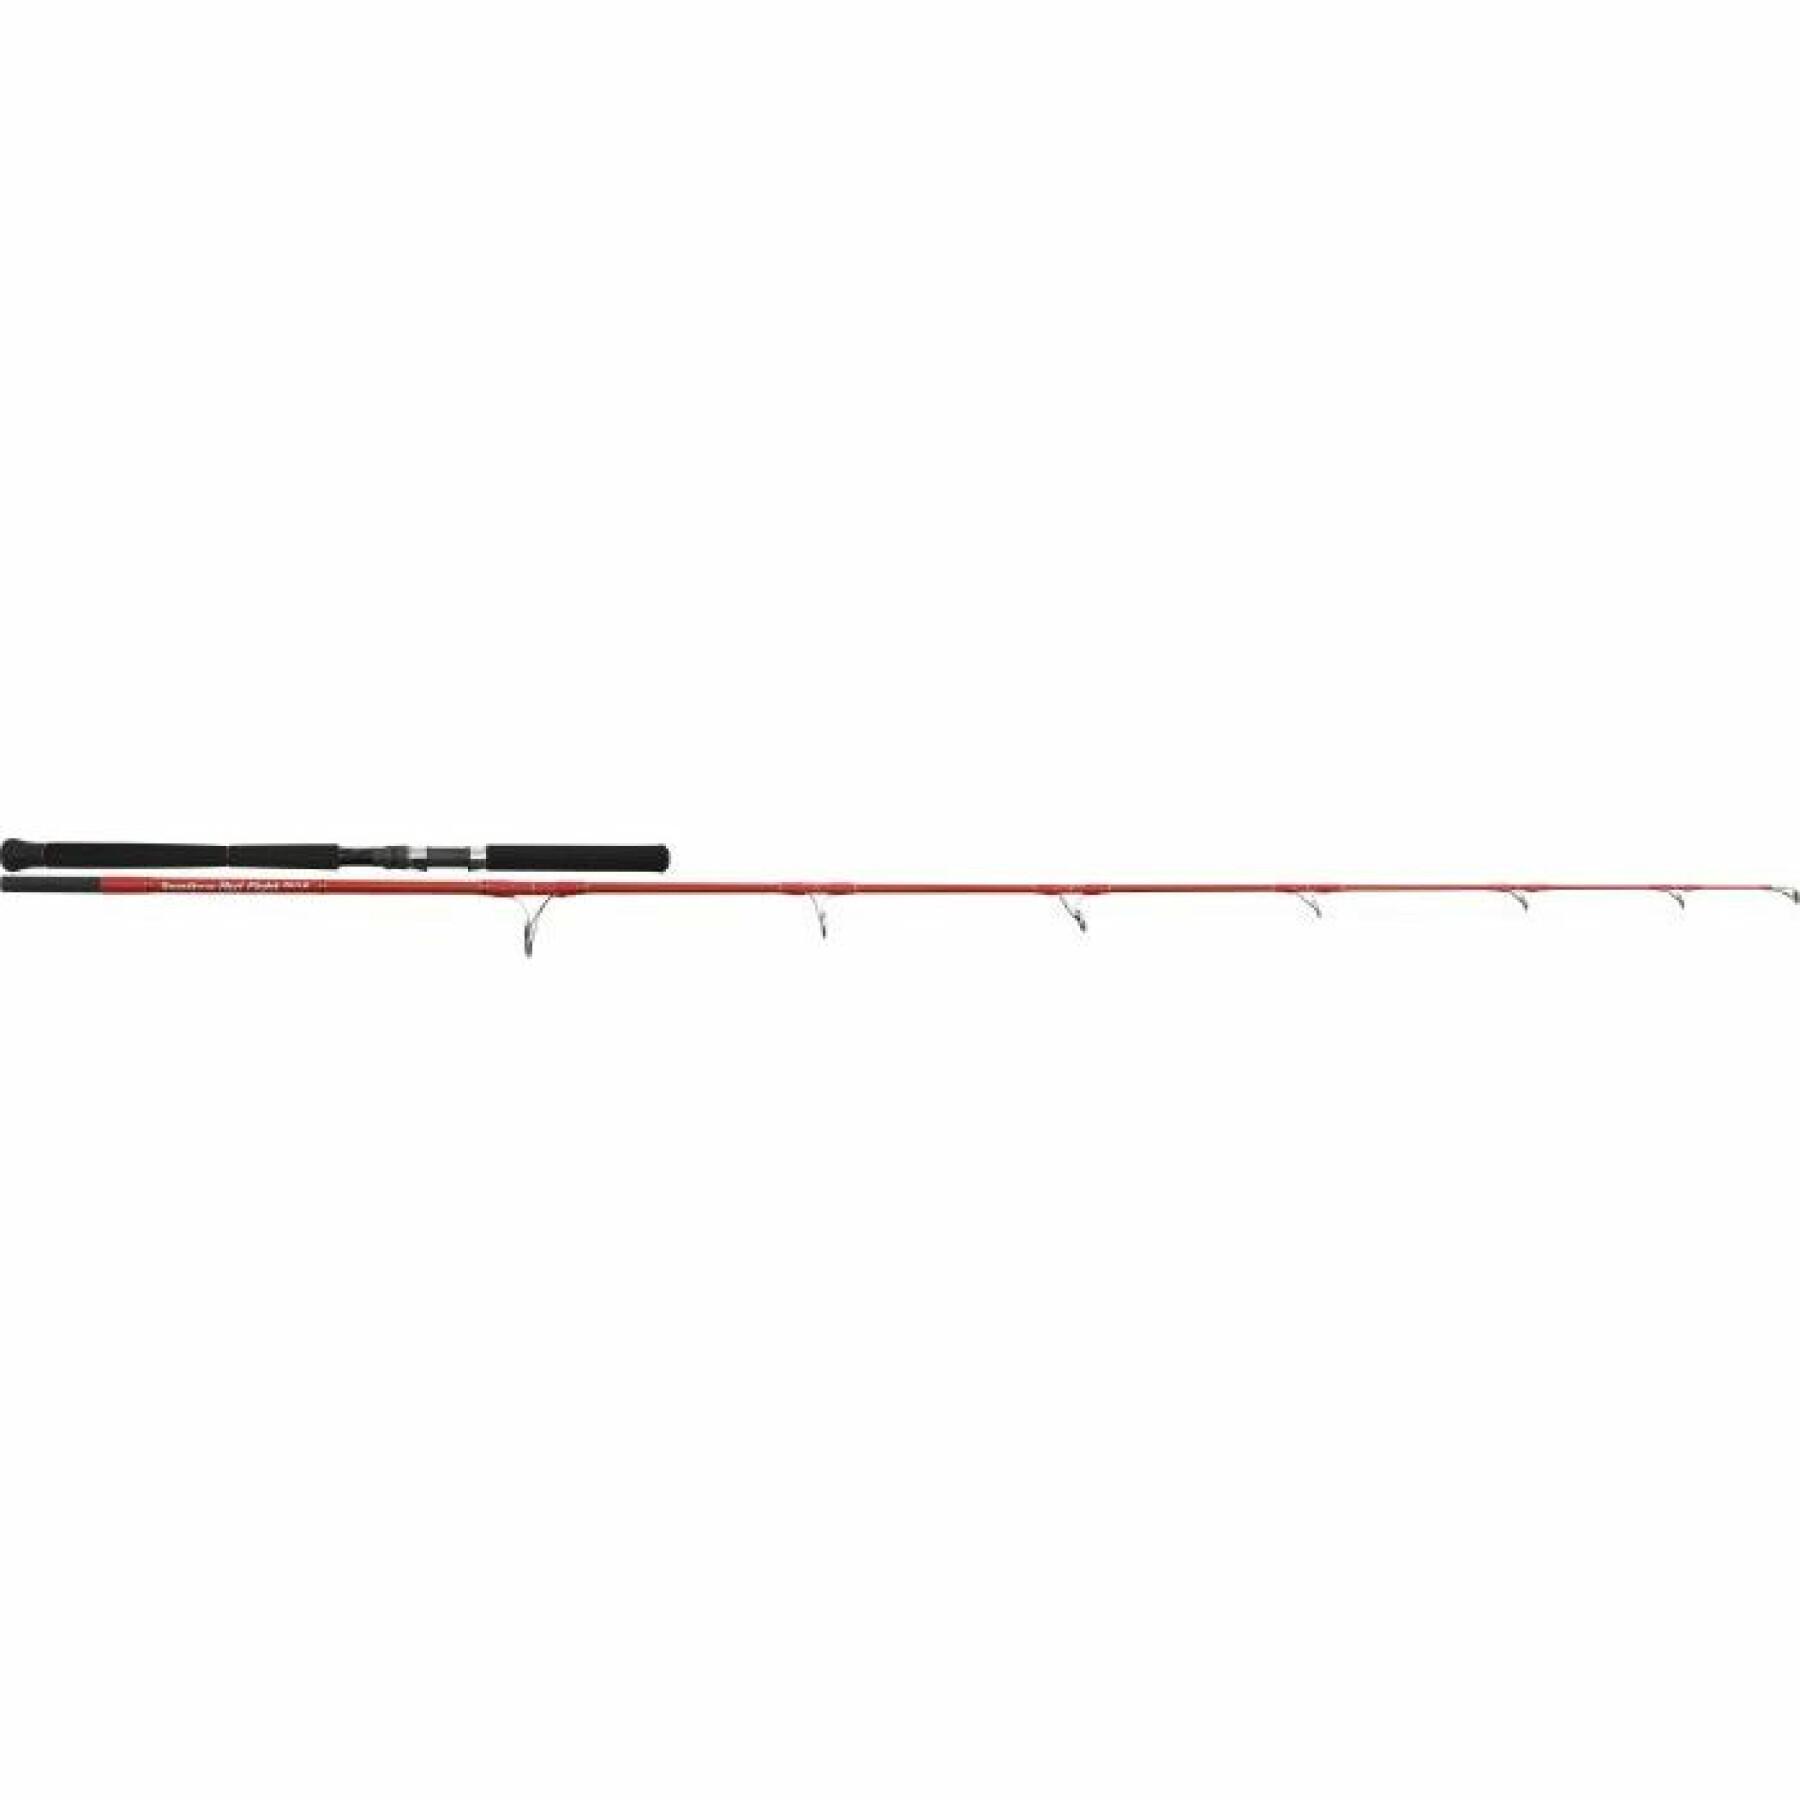 Spinstang Tenryu Red Fight 120-230g